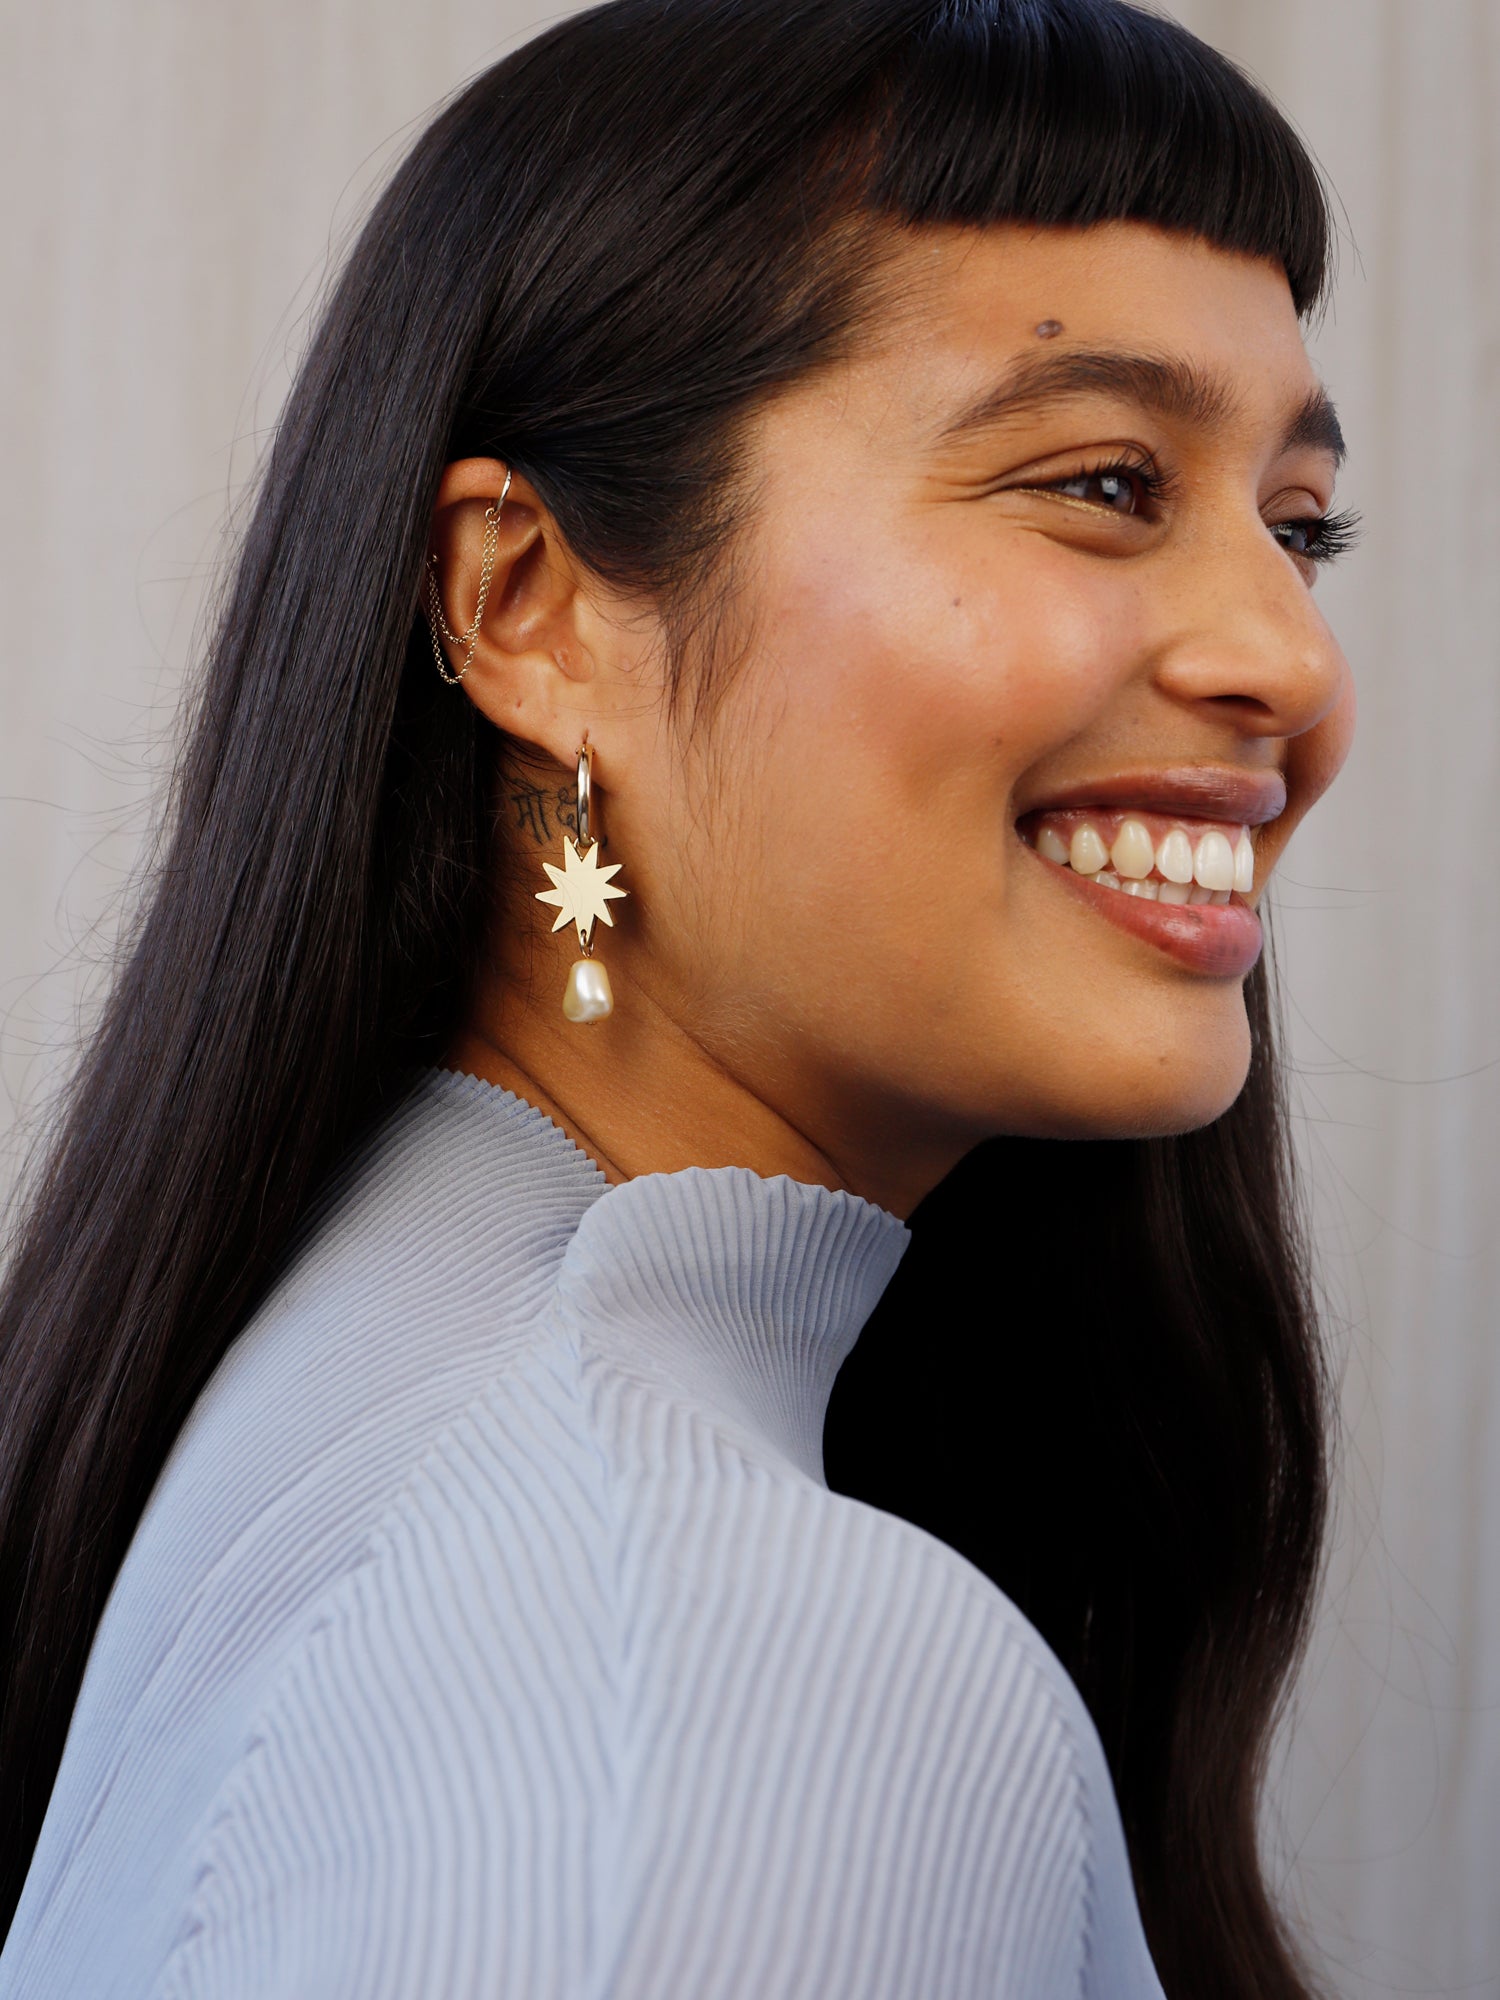 Elegant hoop earrings, inspired by Matisse's cutout-style stars. Made in brass with our signature wood base, Czech glass baroque pearls and 14k gold-filled findings. Handmade in the UK by Wolf & Moon.